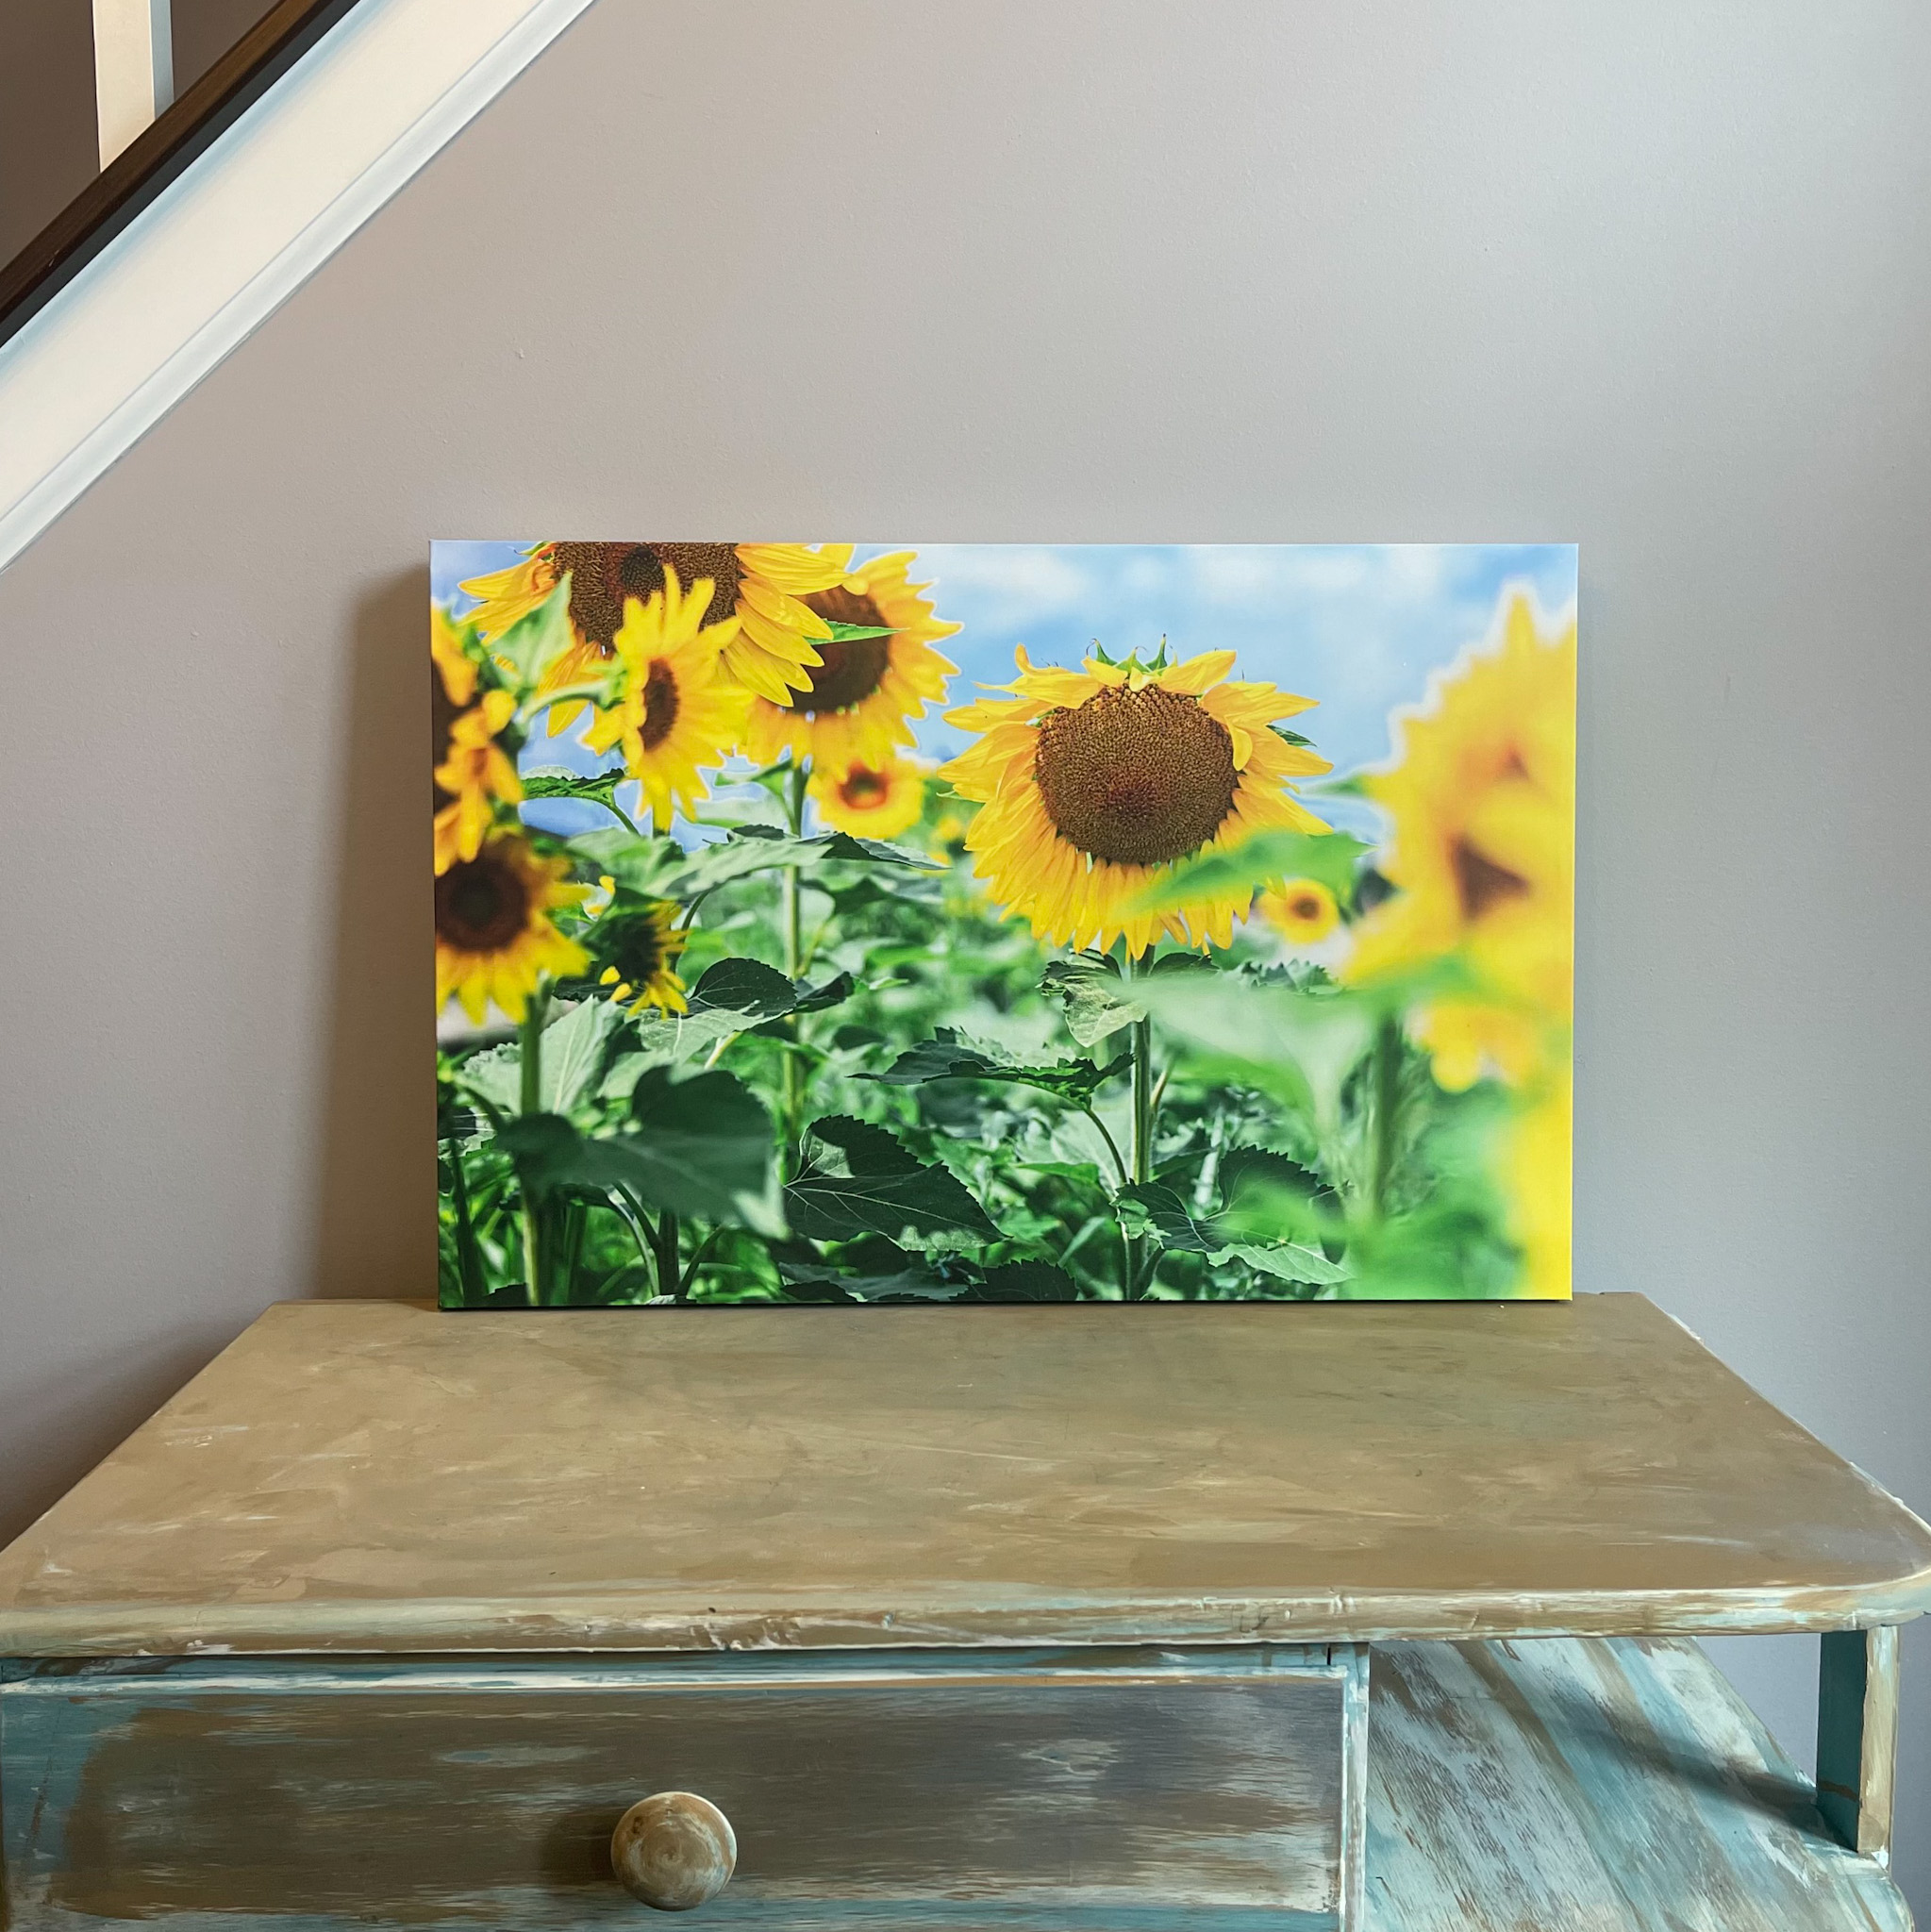 16”x20” Stretched Canvas - Bloomed Sunflower